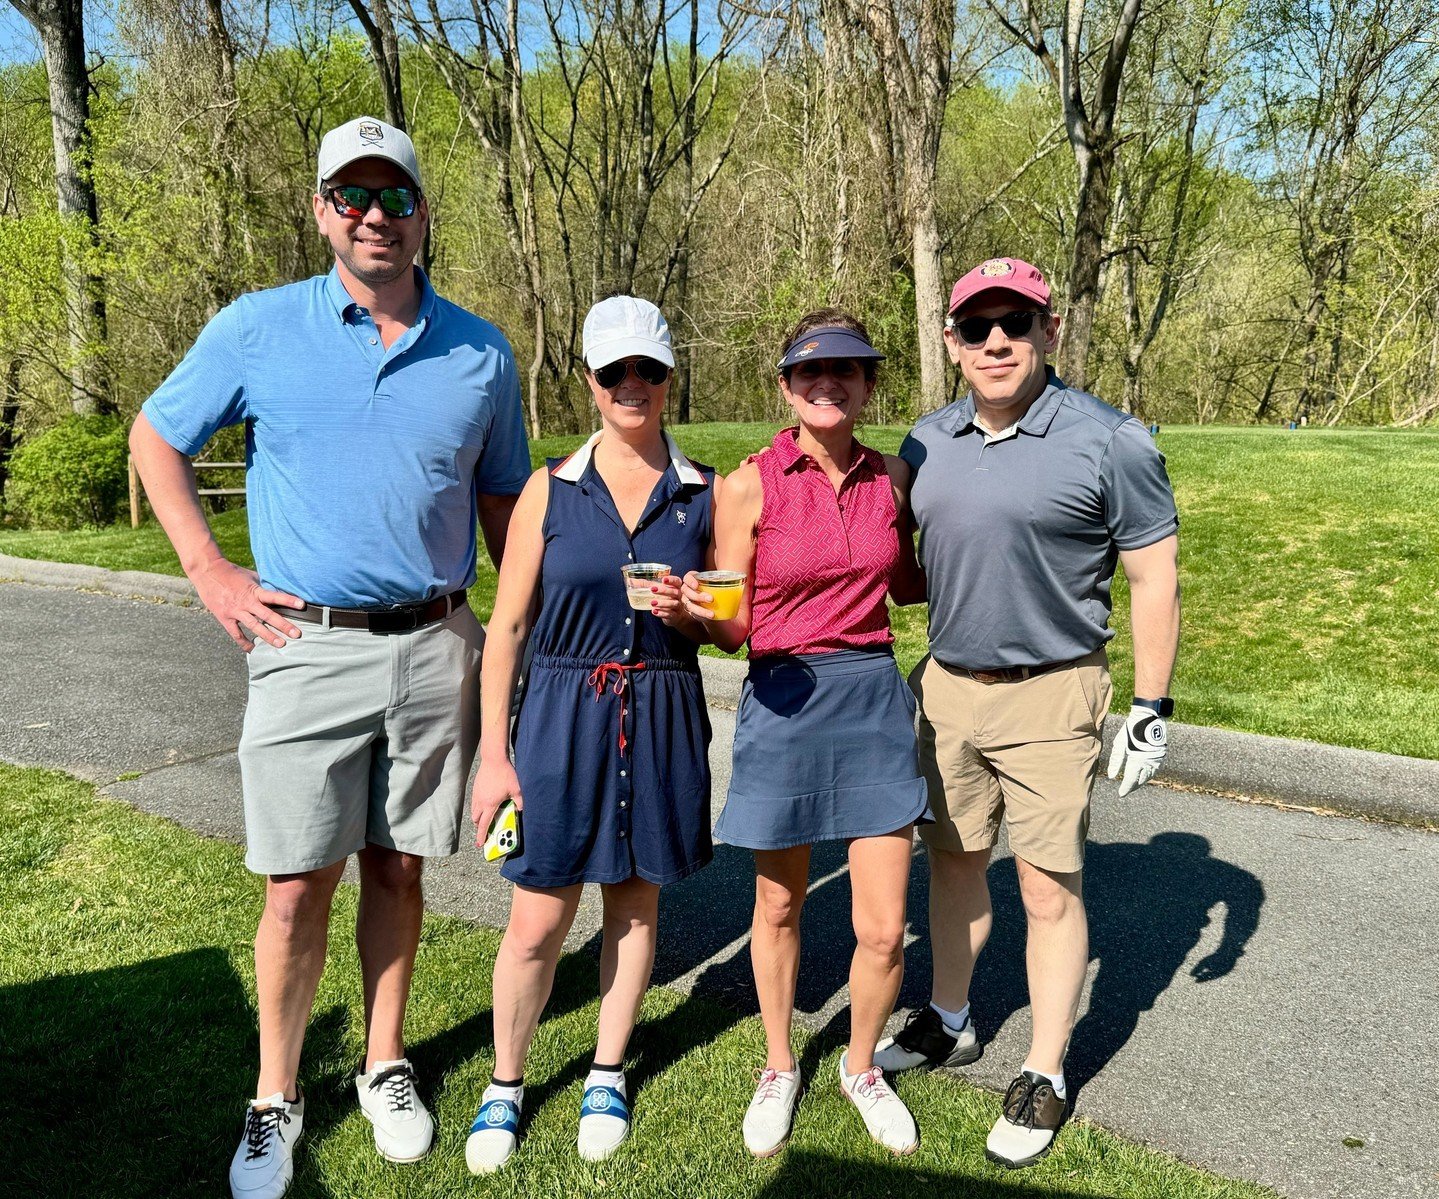 Yesterday was a fantastic day at Norbeck Country Club as Regina DeMeo was joined by Hunter Hart, Aindrea Conroy, and Marc Weinstein for the Women's Bar Association of DC golf tournament. The sun was shining (for the most part), the competition was fi